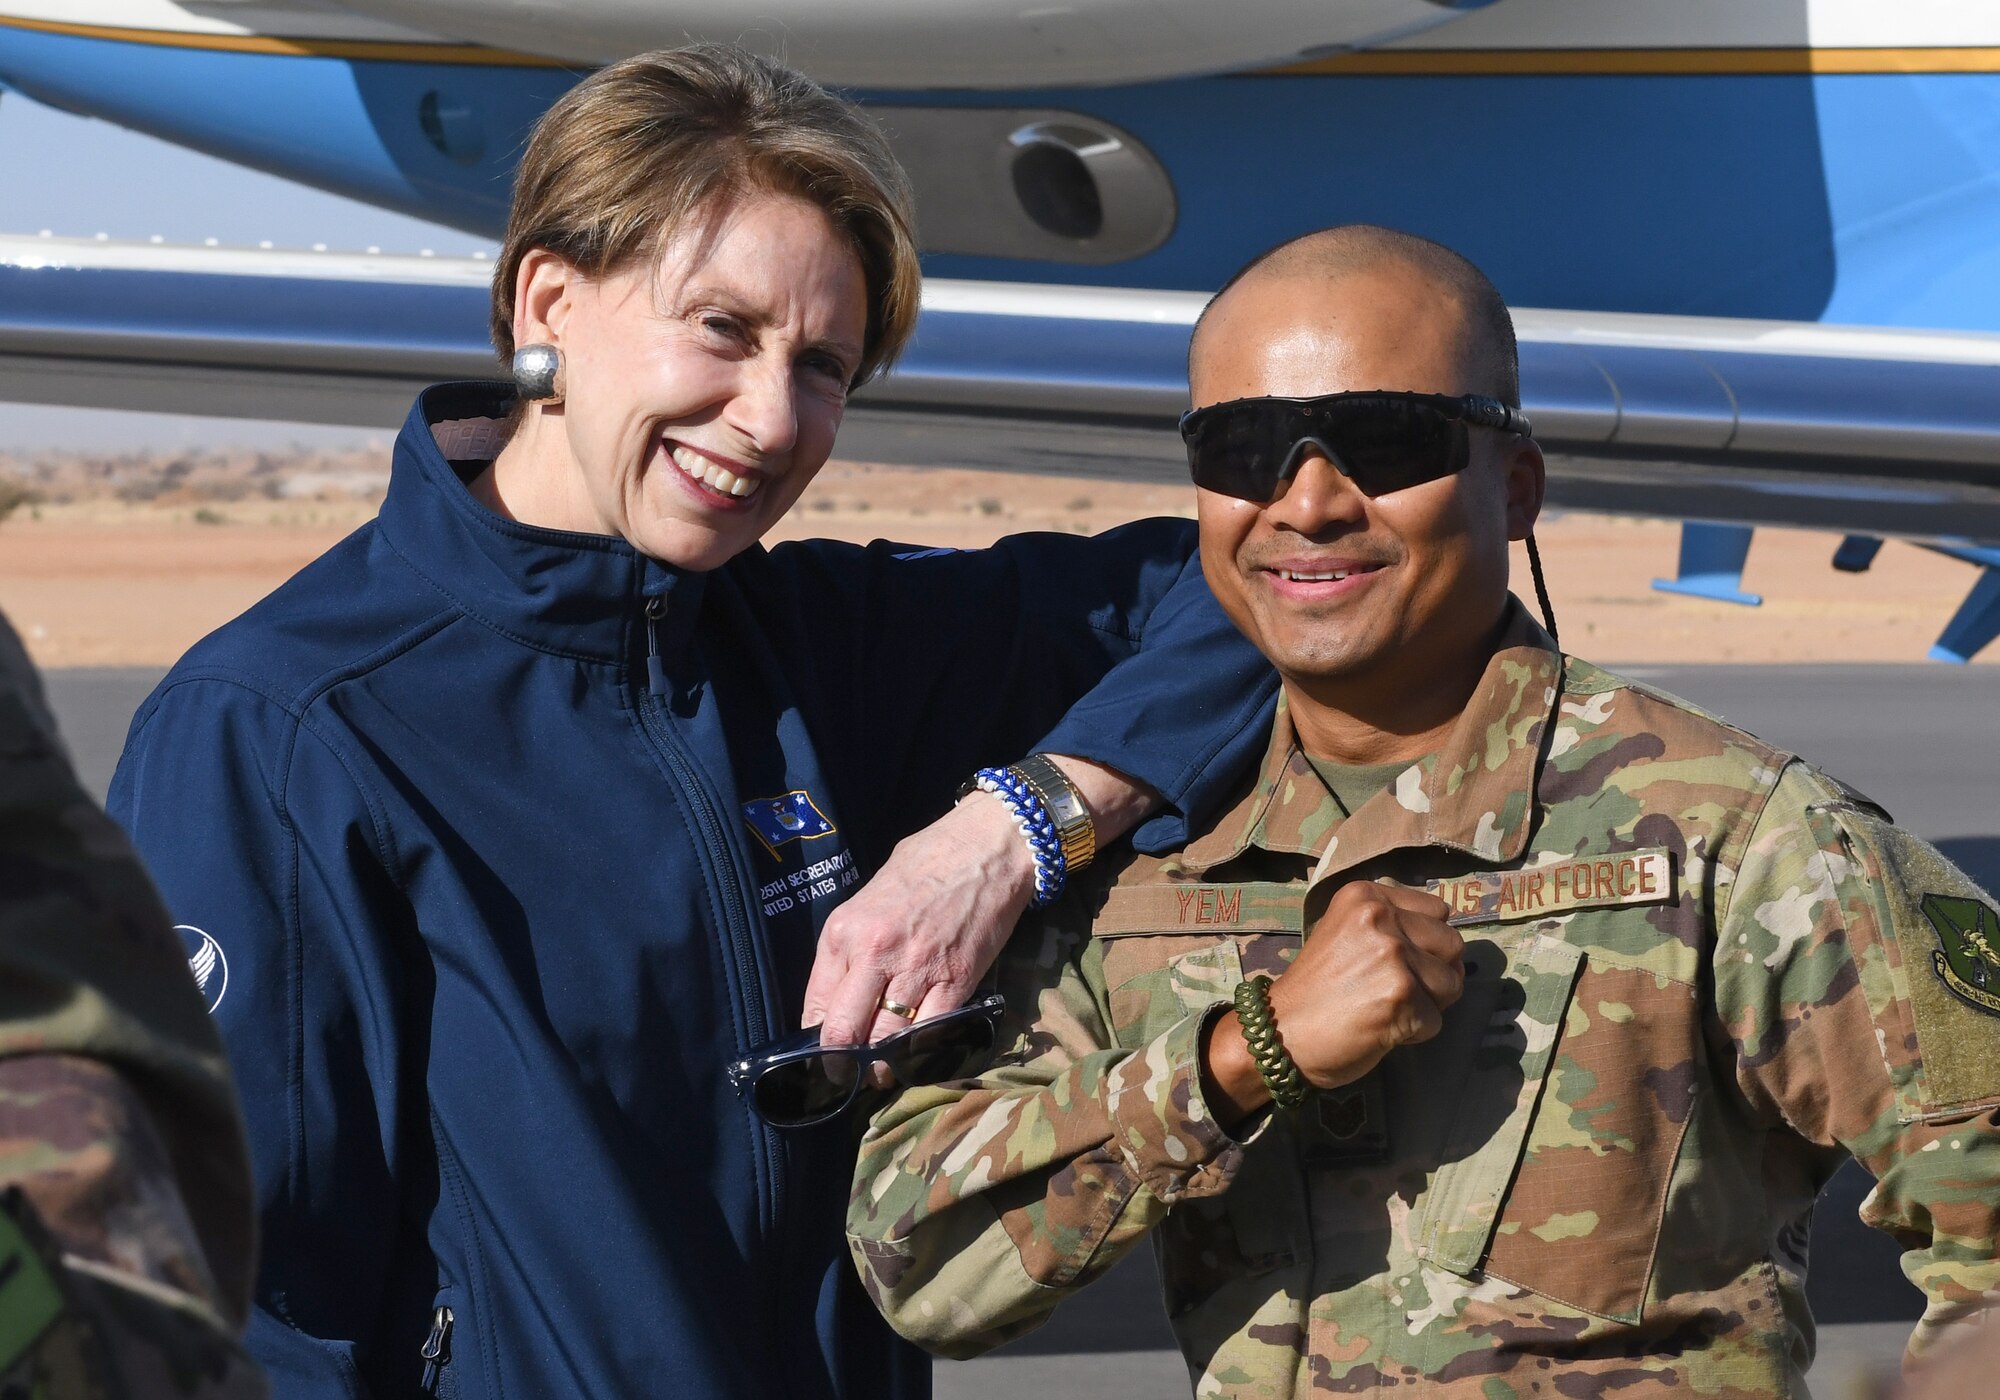 Secretary of the Air Force Barbara M. Barrett and U.S. Air Force Tech. Sgt. Siden Yem, 724th Expeditionary Air Base Squadron material management section chief, show off their paracord bracelets he made at Nigerien Air Base 201, Niger, Dec. 21, 2019. During her first visit to the African continent since taking office in October, Barrett’s focus was centered solely on the U.S. service members deployed there. (U.S. Air Force photo by Staff Sgt. Alex Fox Echols III)